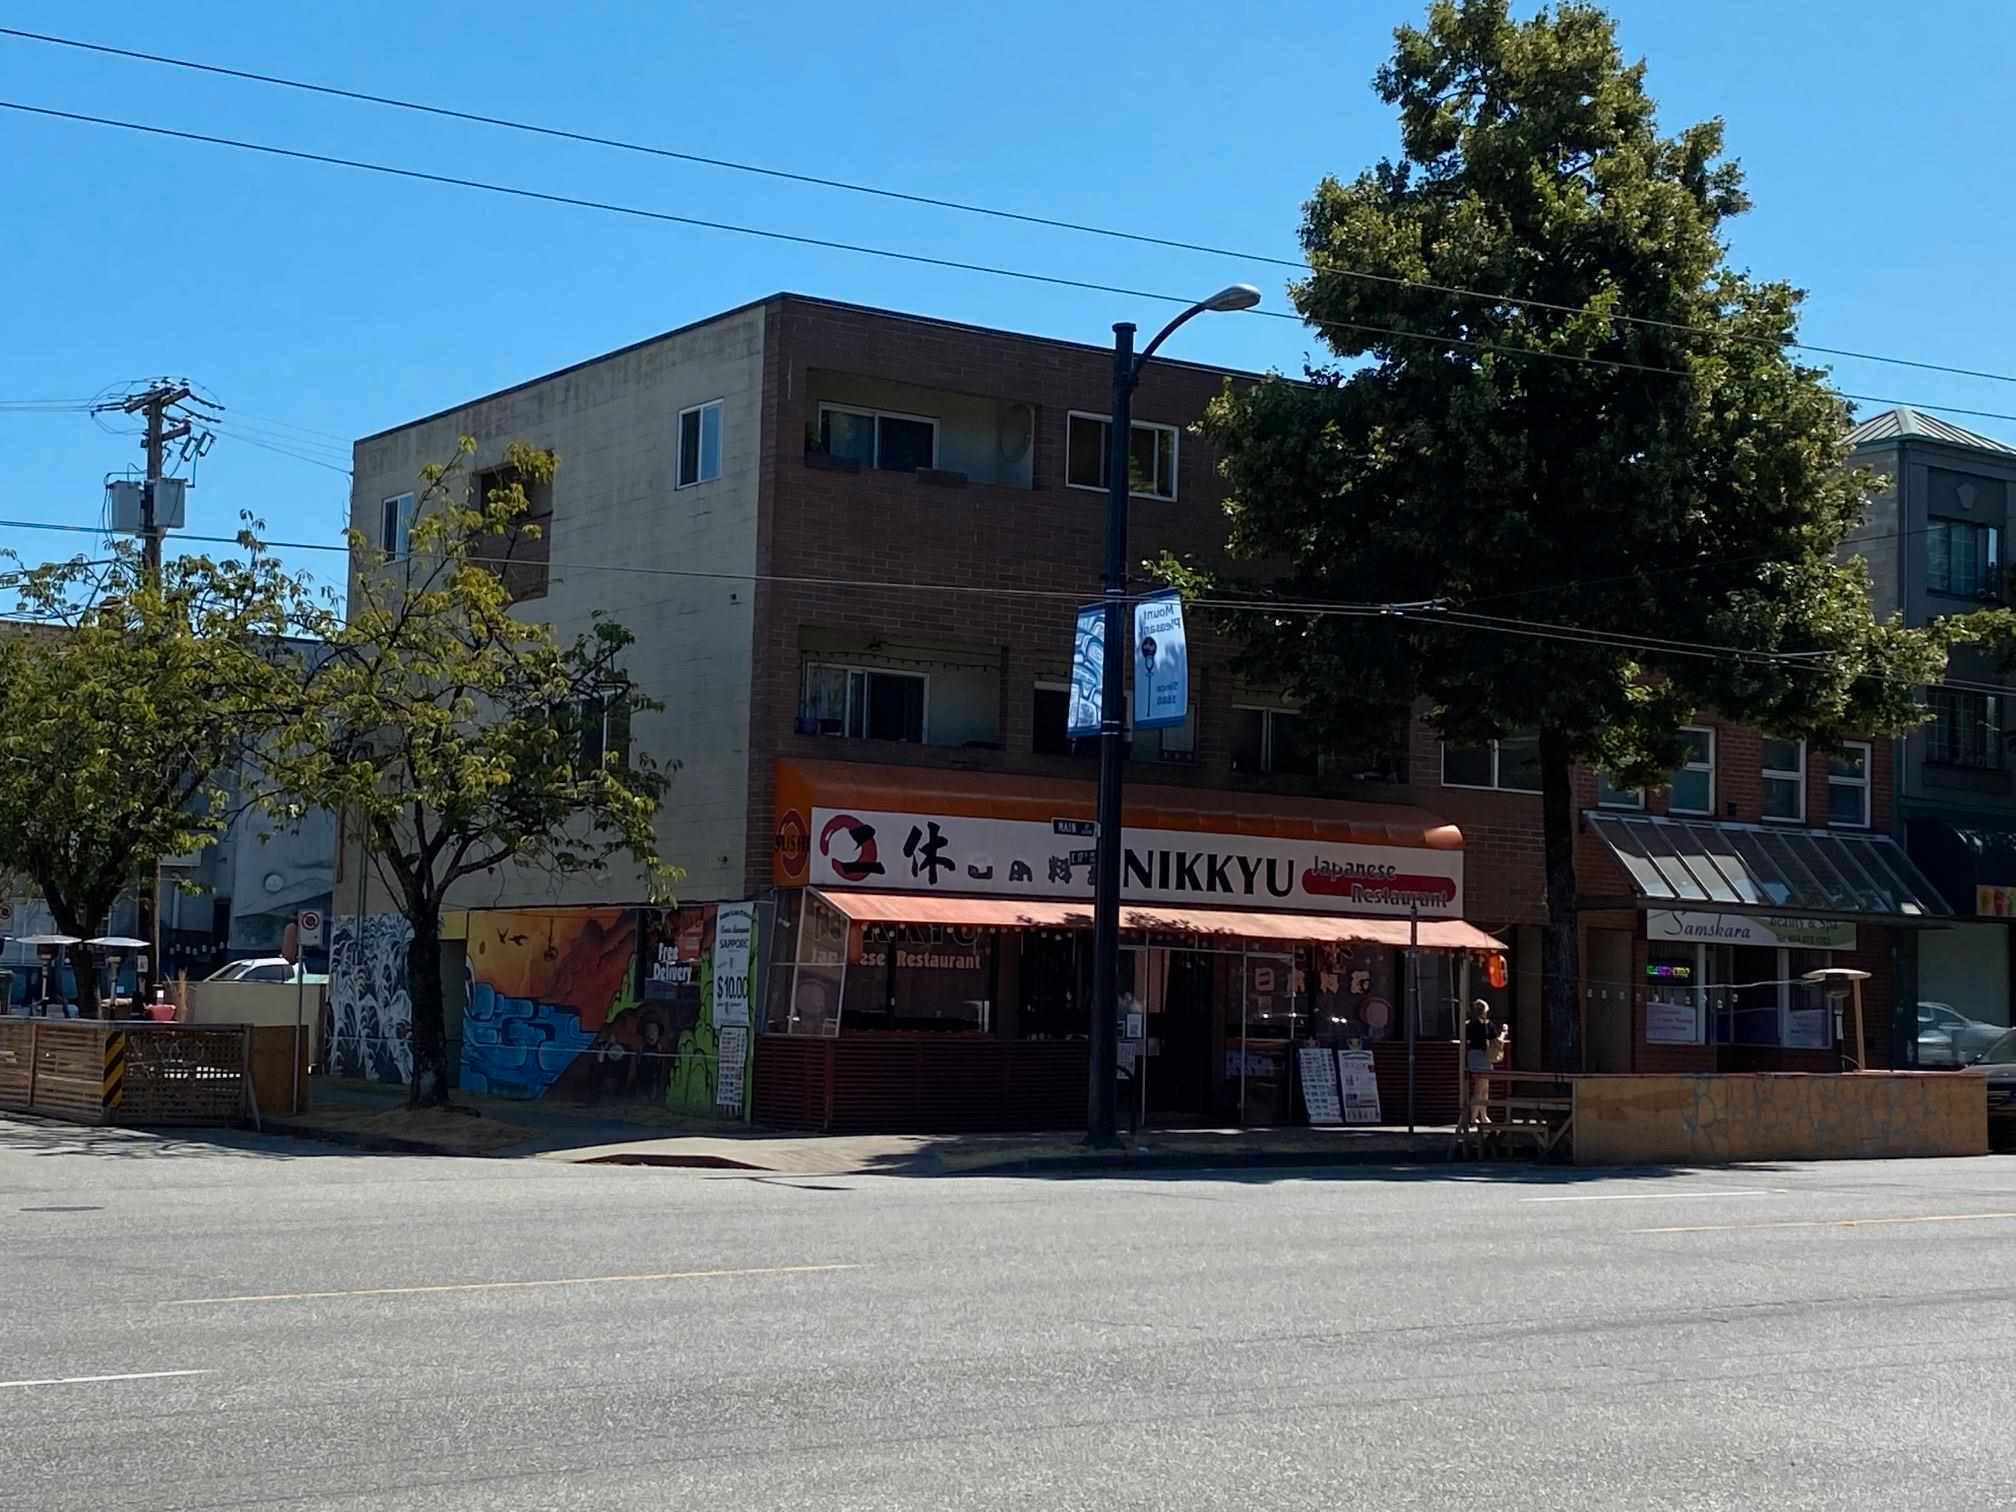 Main Photo: 3302-3310 MAIN Street in Vancouver: Main Retail for sale (Vancouver East)  : MLS®# C8039567